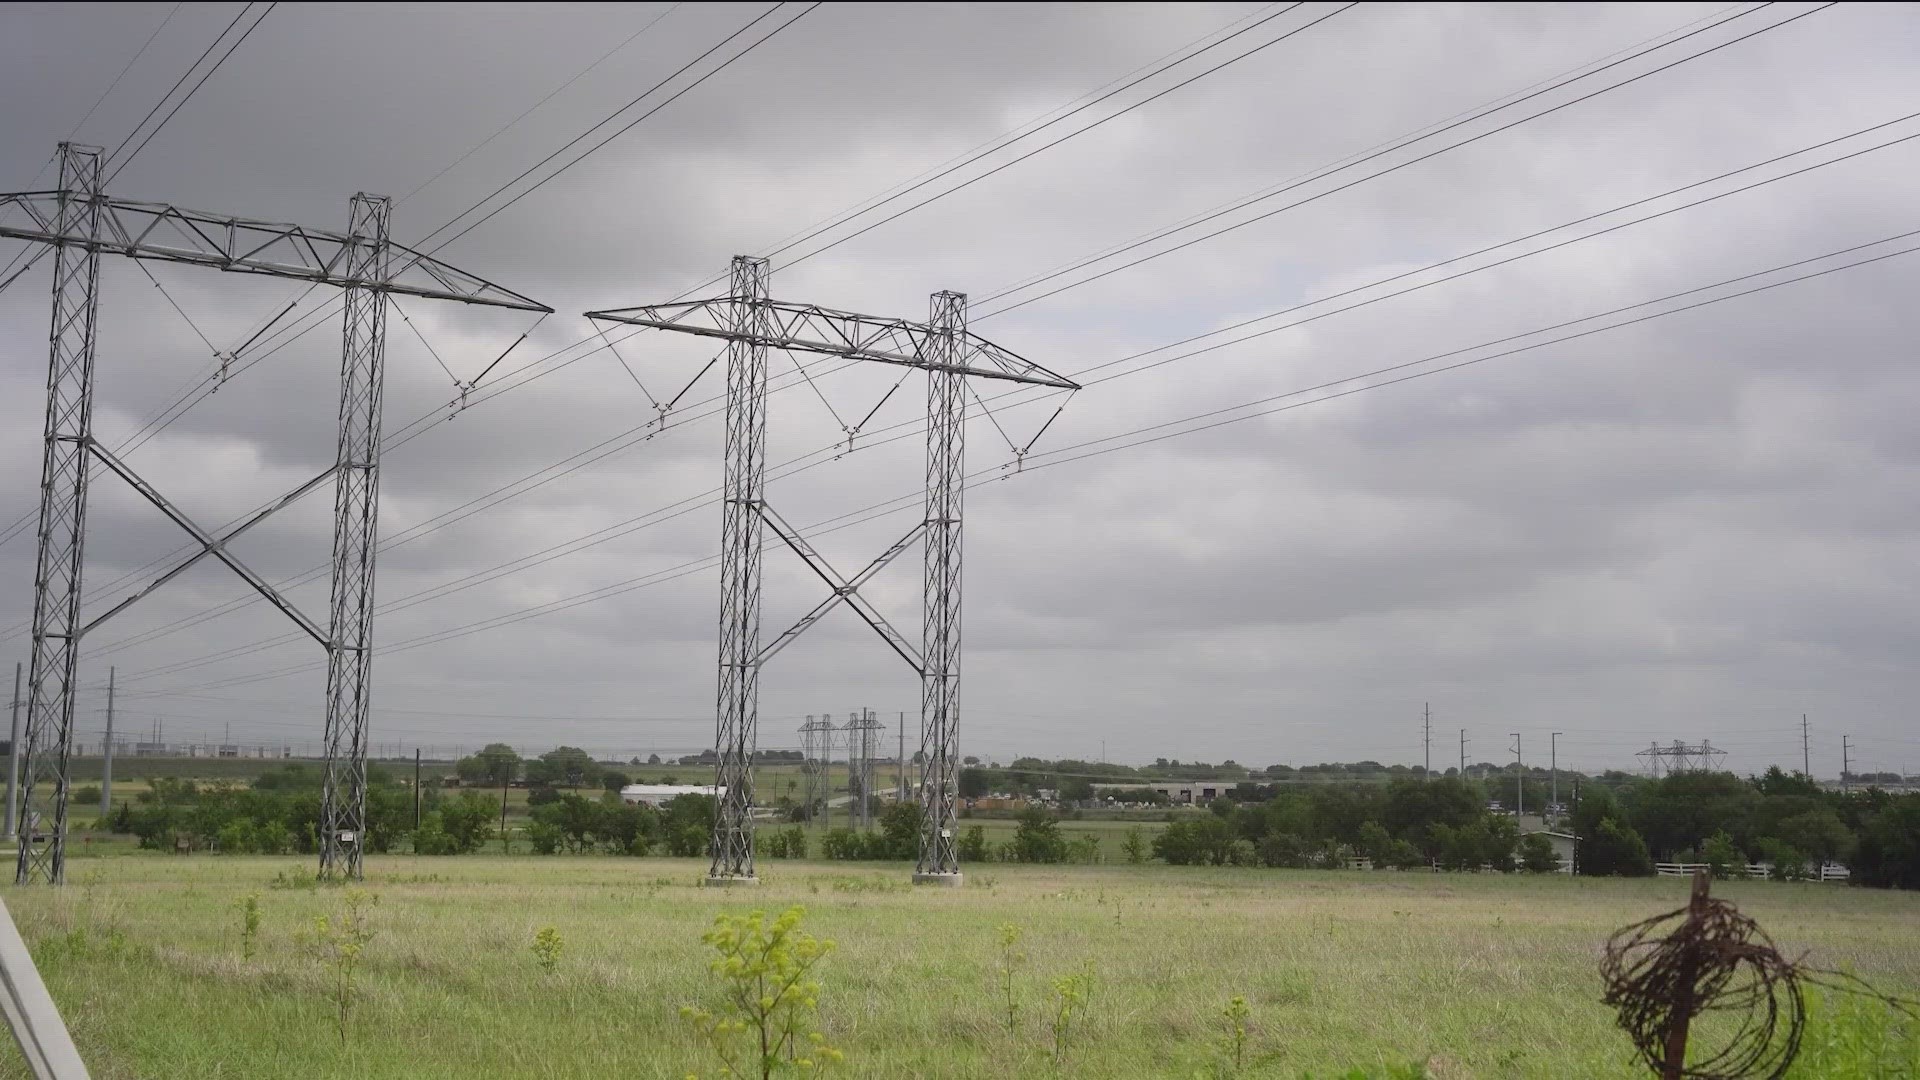 The Texas Public Utility Commission did not consider AARP and Texas Consumer Association’s petition showing difficulty knowing when companies must keep power on.